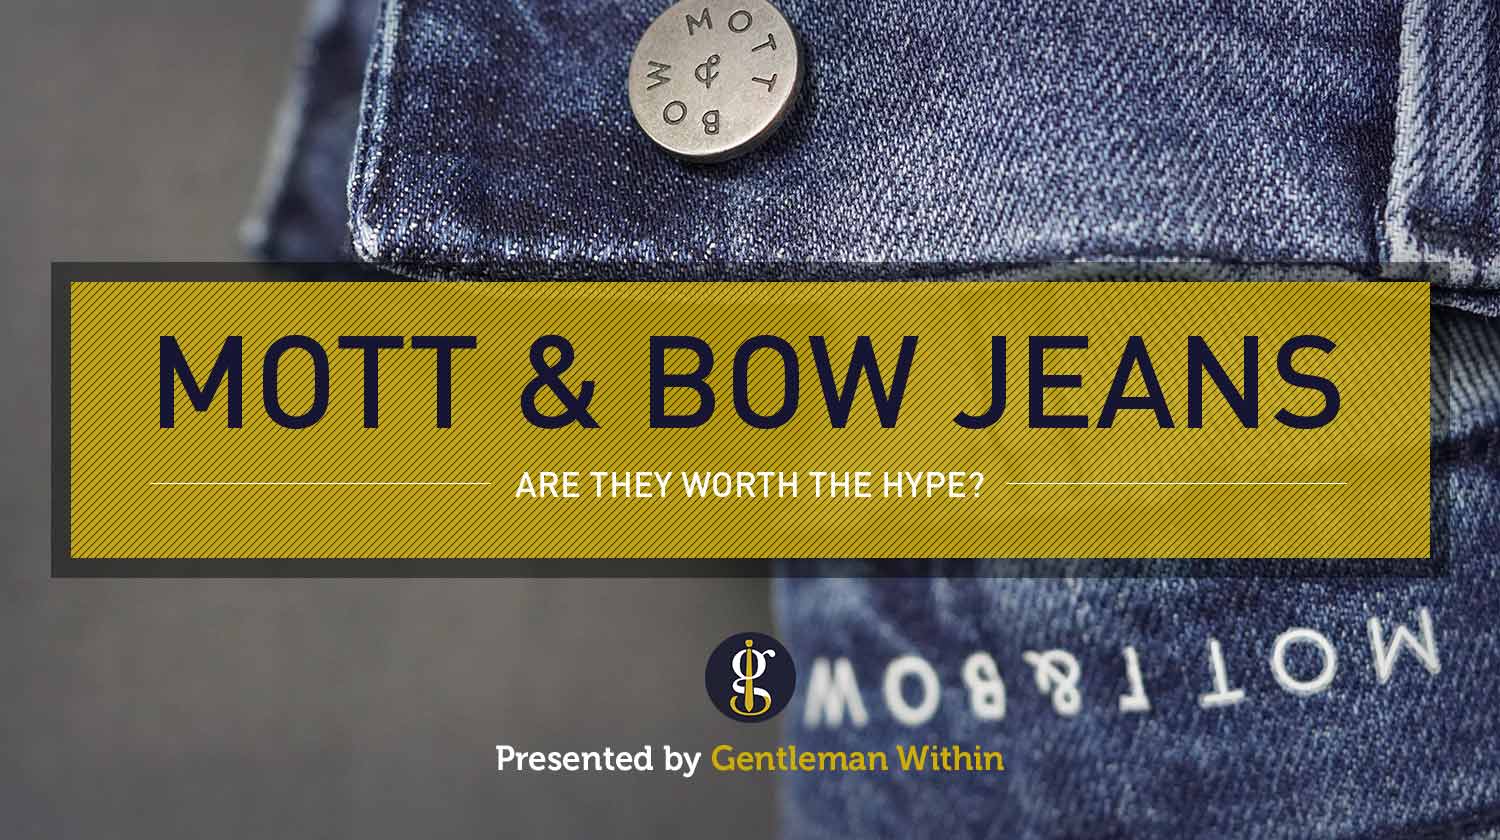 Mott & Bow Jeans Review: Worth the Hype? | GENTLEMAN WITHIN